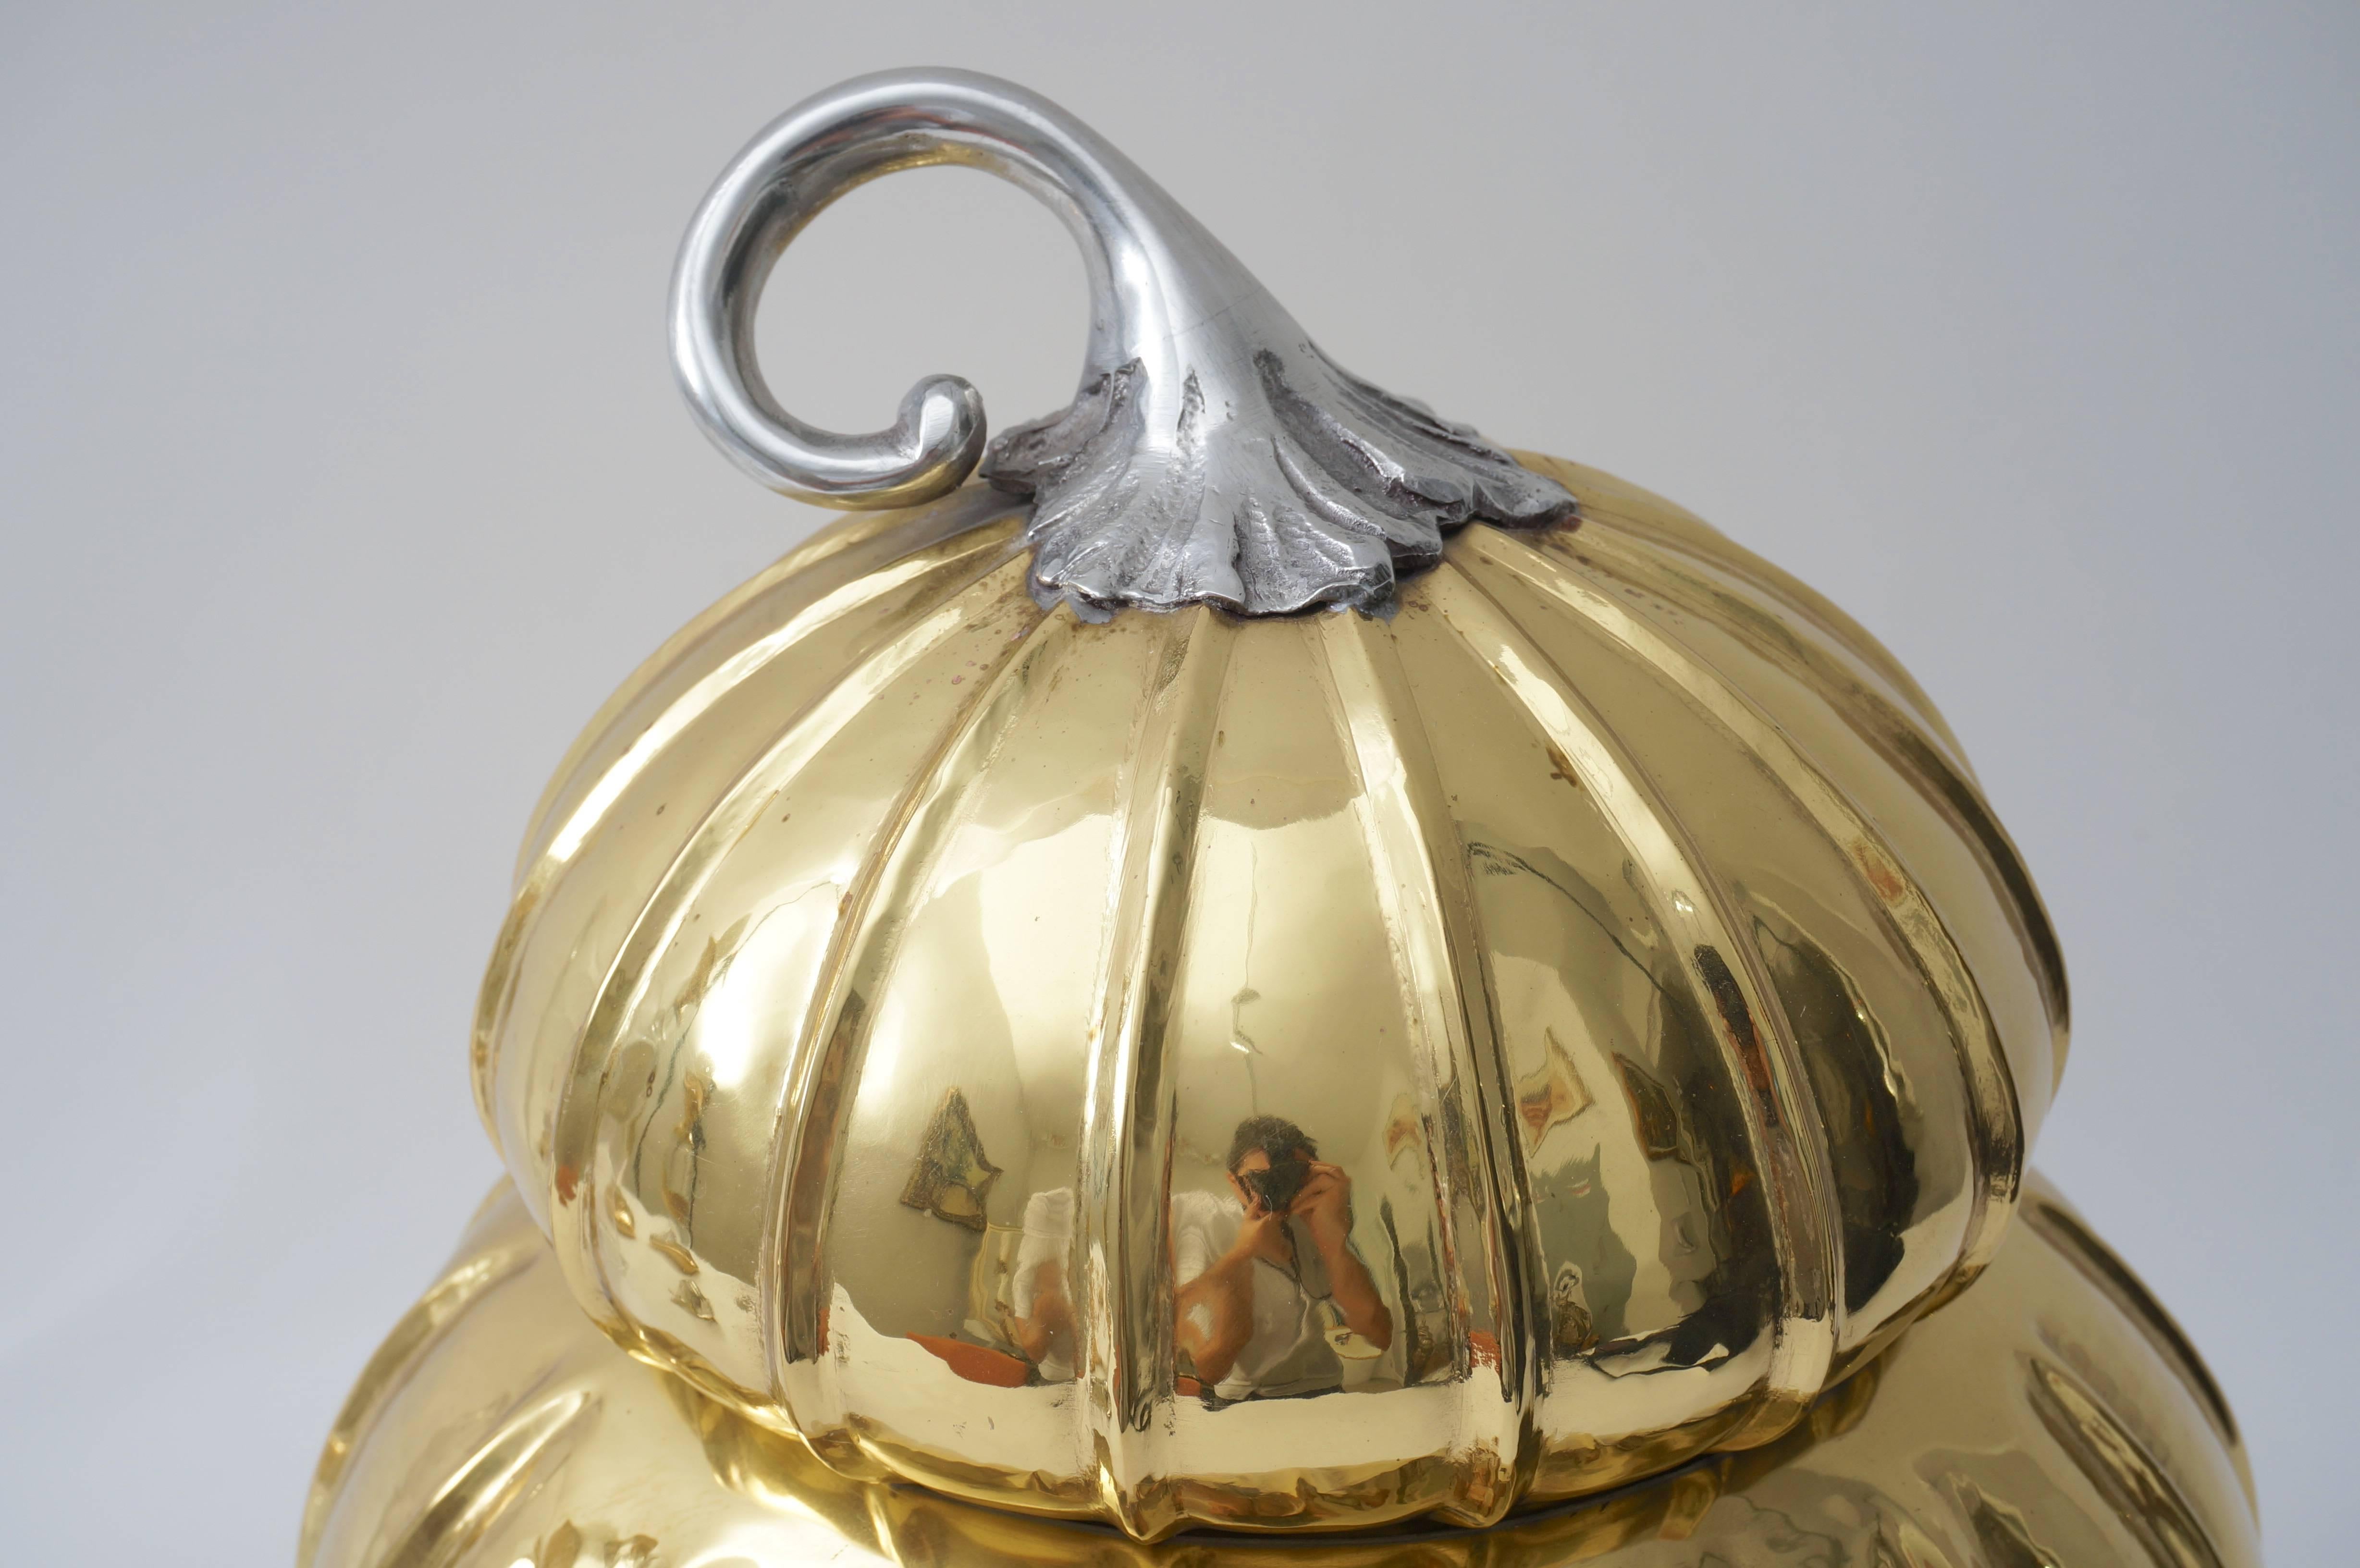 This stylish handcrafted, melon-form ice bucket in brass and silver plate was fabricated in Italy and dates to the 1970s-1980s.